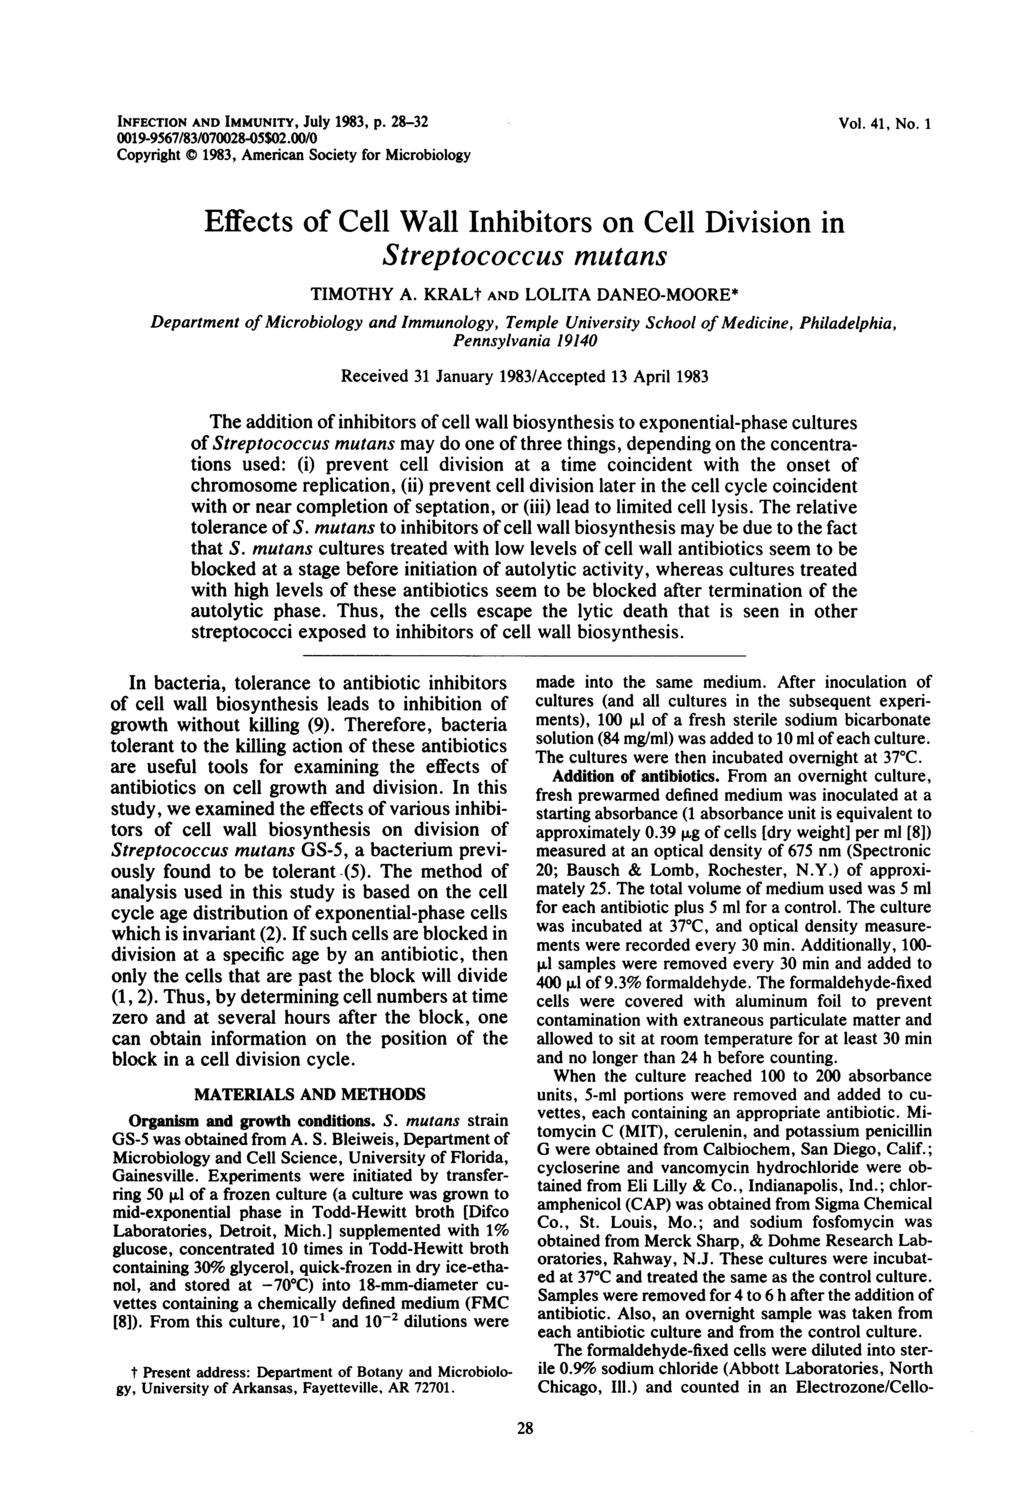 INFECTION AND IMMUNITY, July 1983, P. 28-32 19-9567/83/728-5$2./ Copyright 1983, American Society for Microbiology Vol. 41, No.